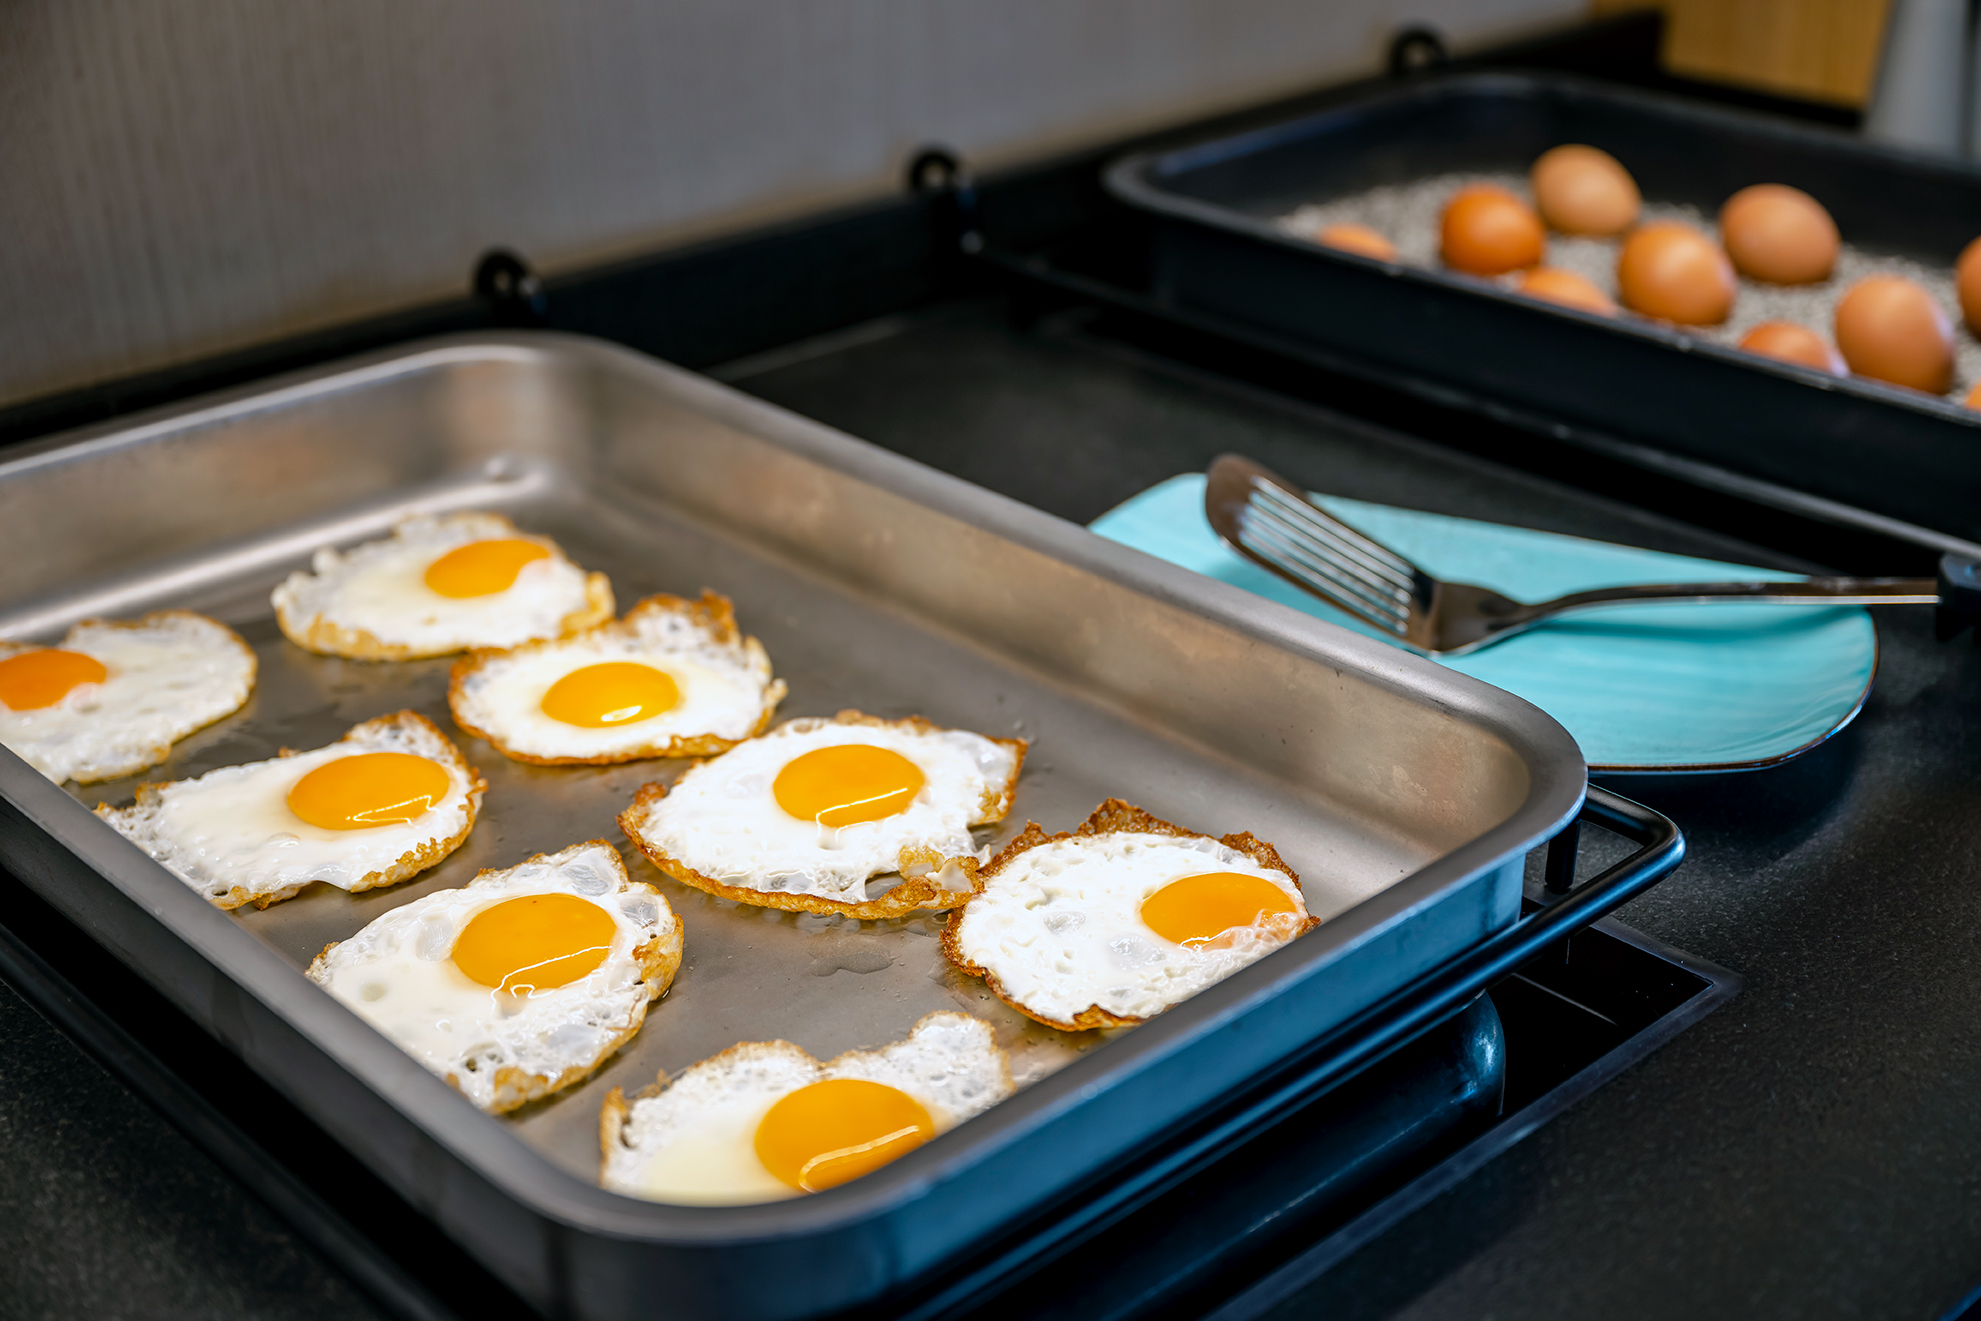 Fried eggs and boiled eggs at the breakfast bufffet